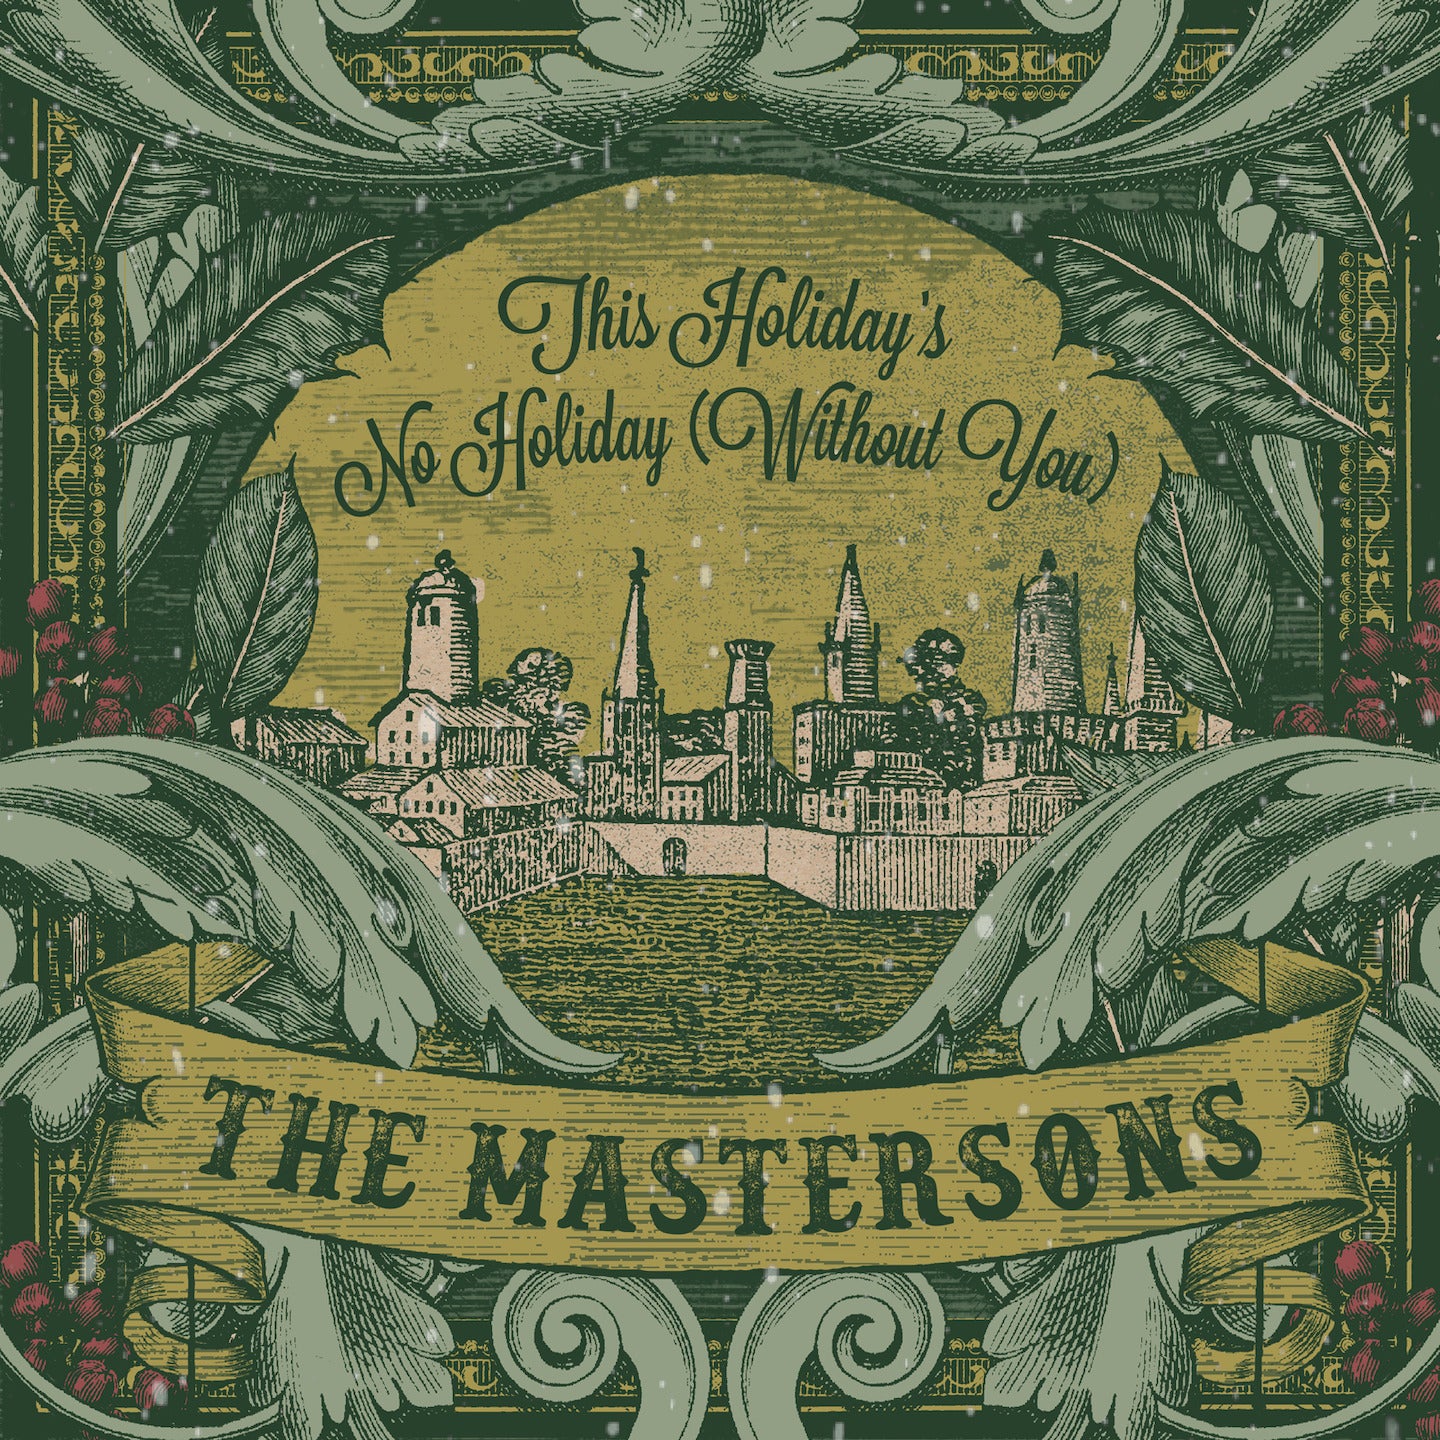 The Mastersons | This Holiday’s No Holiday (Without You)